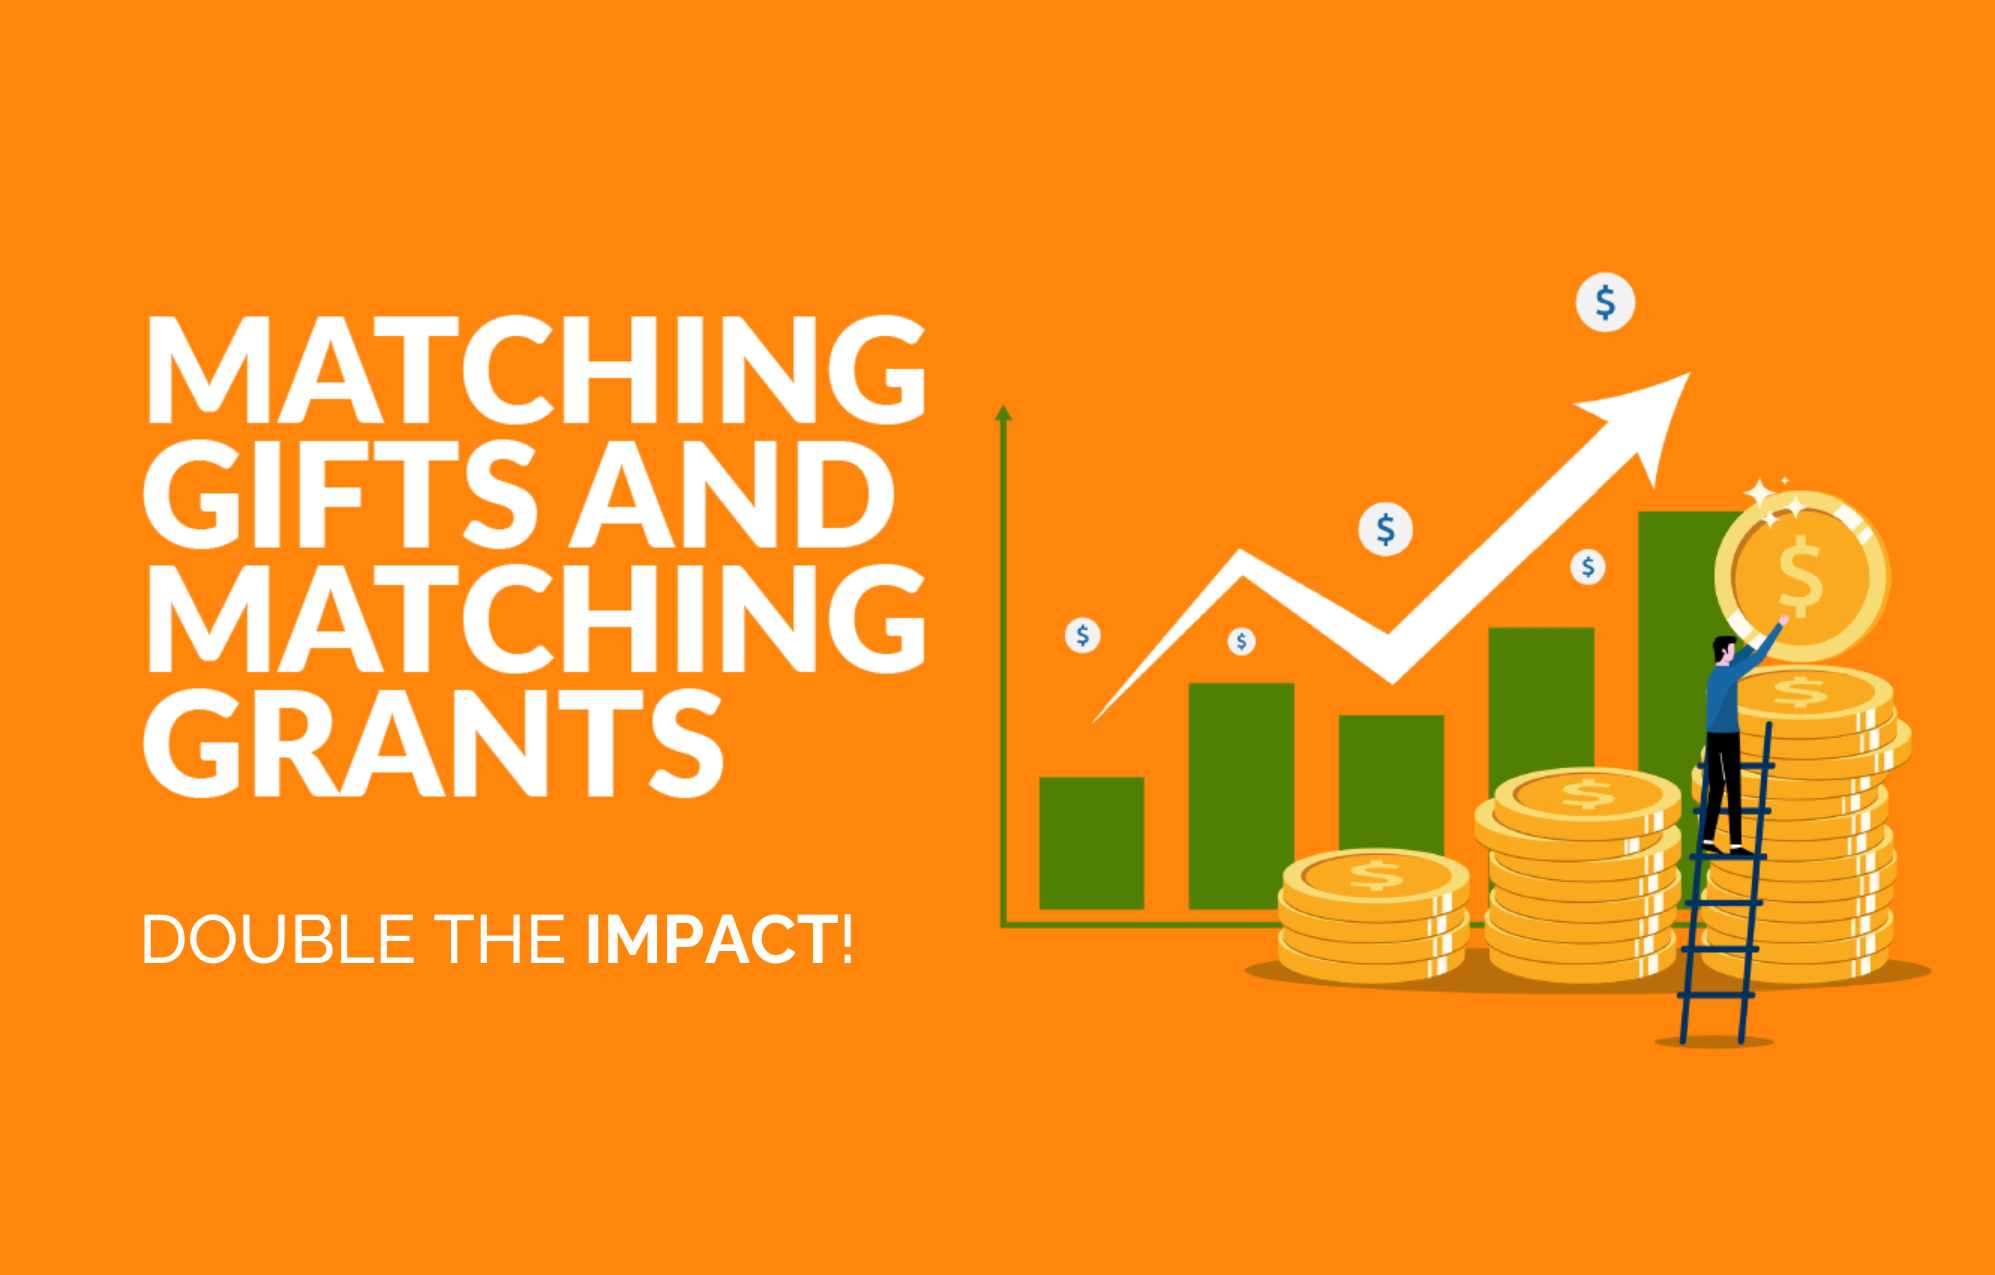 Matching Gifts and Matching Grants Double the Impact!